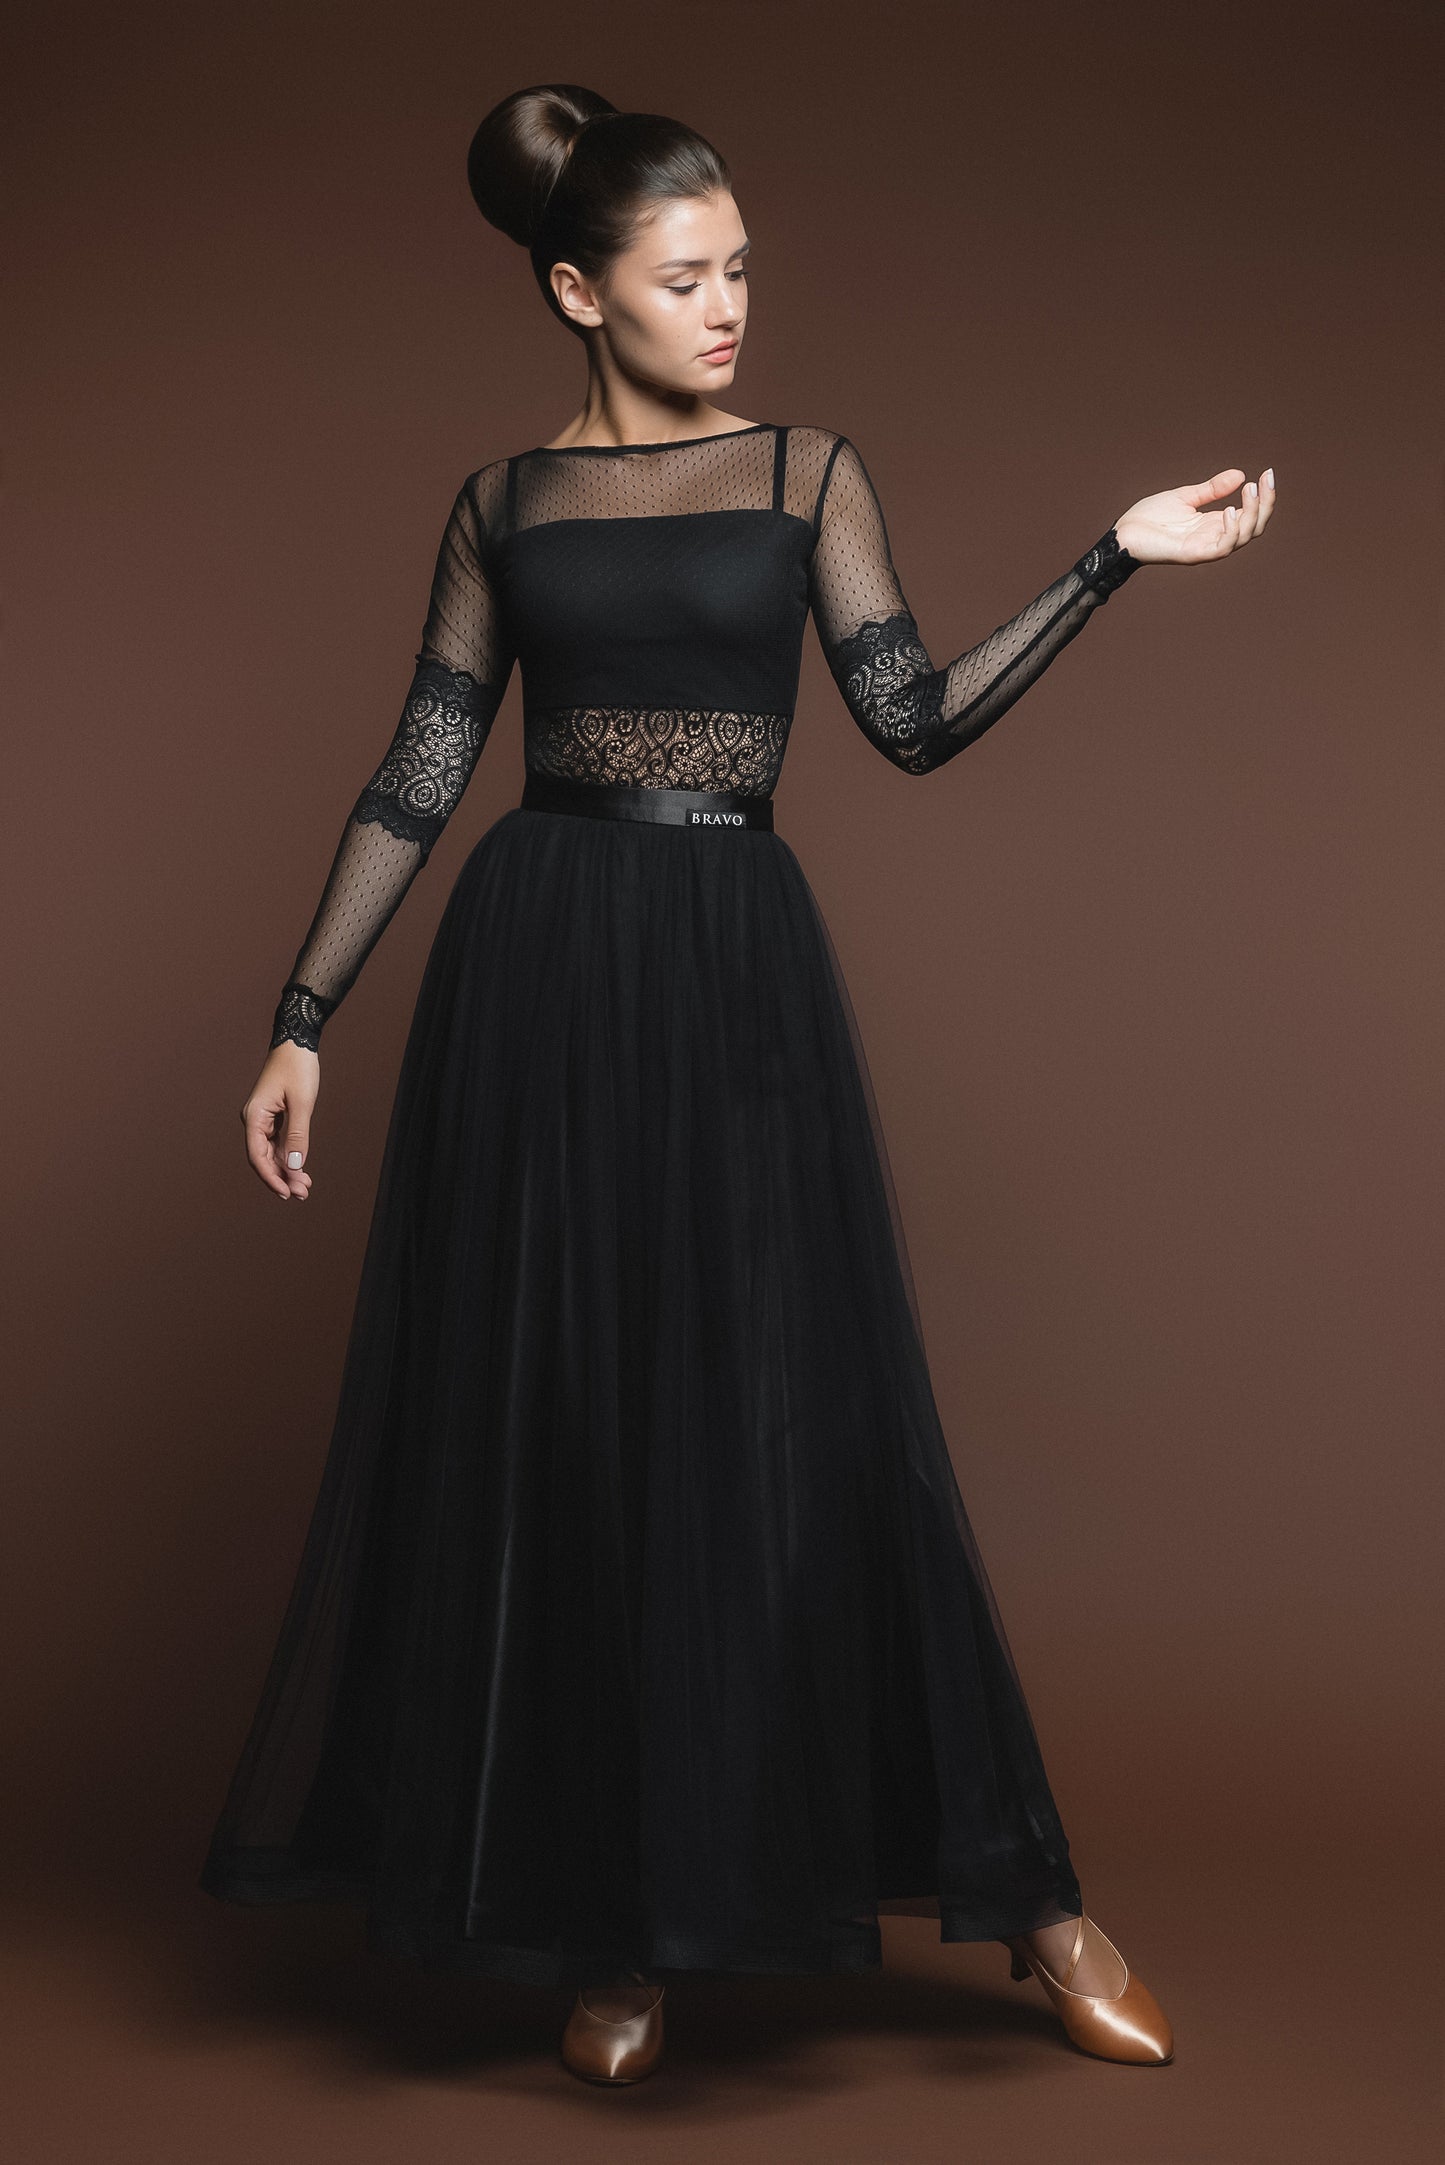 Soft Black Ballroom Practice Skirt with Wrapped Horsehair Hem and Satin Waistband Matching Lace Ballroom Practice Top Pra526